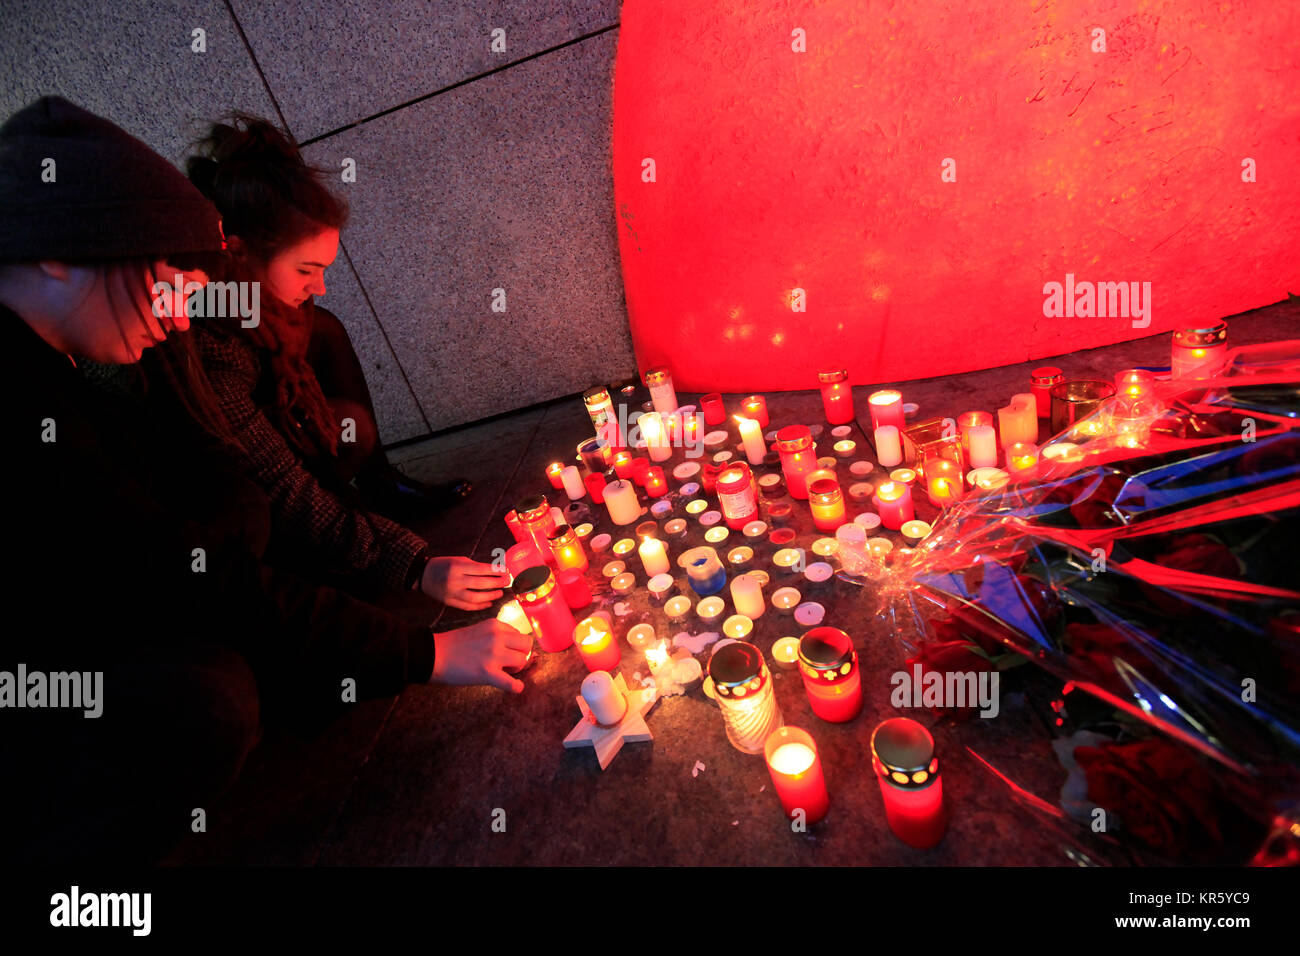 Prague, Czech Republic. 18th Dec, 2017. A public meeting commemorating Vaclav Havel, the late Czech dissident, playwright and first post-communist president, on the 6th anniversary of his death was held in Vaclav Havel Square in Prague today, including the lighting of candles in Prague, Czech Republic, December 18, 2016. Credit: Michaela Rihova/CTK Photo/Alamy Live News Stock Photo